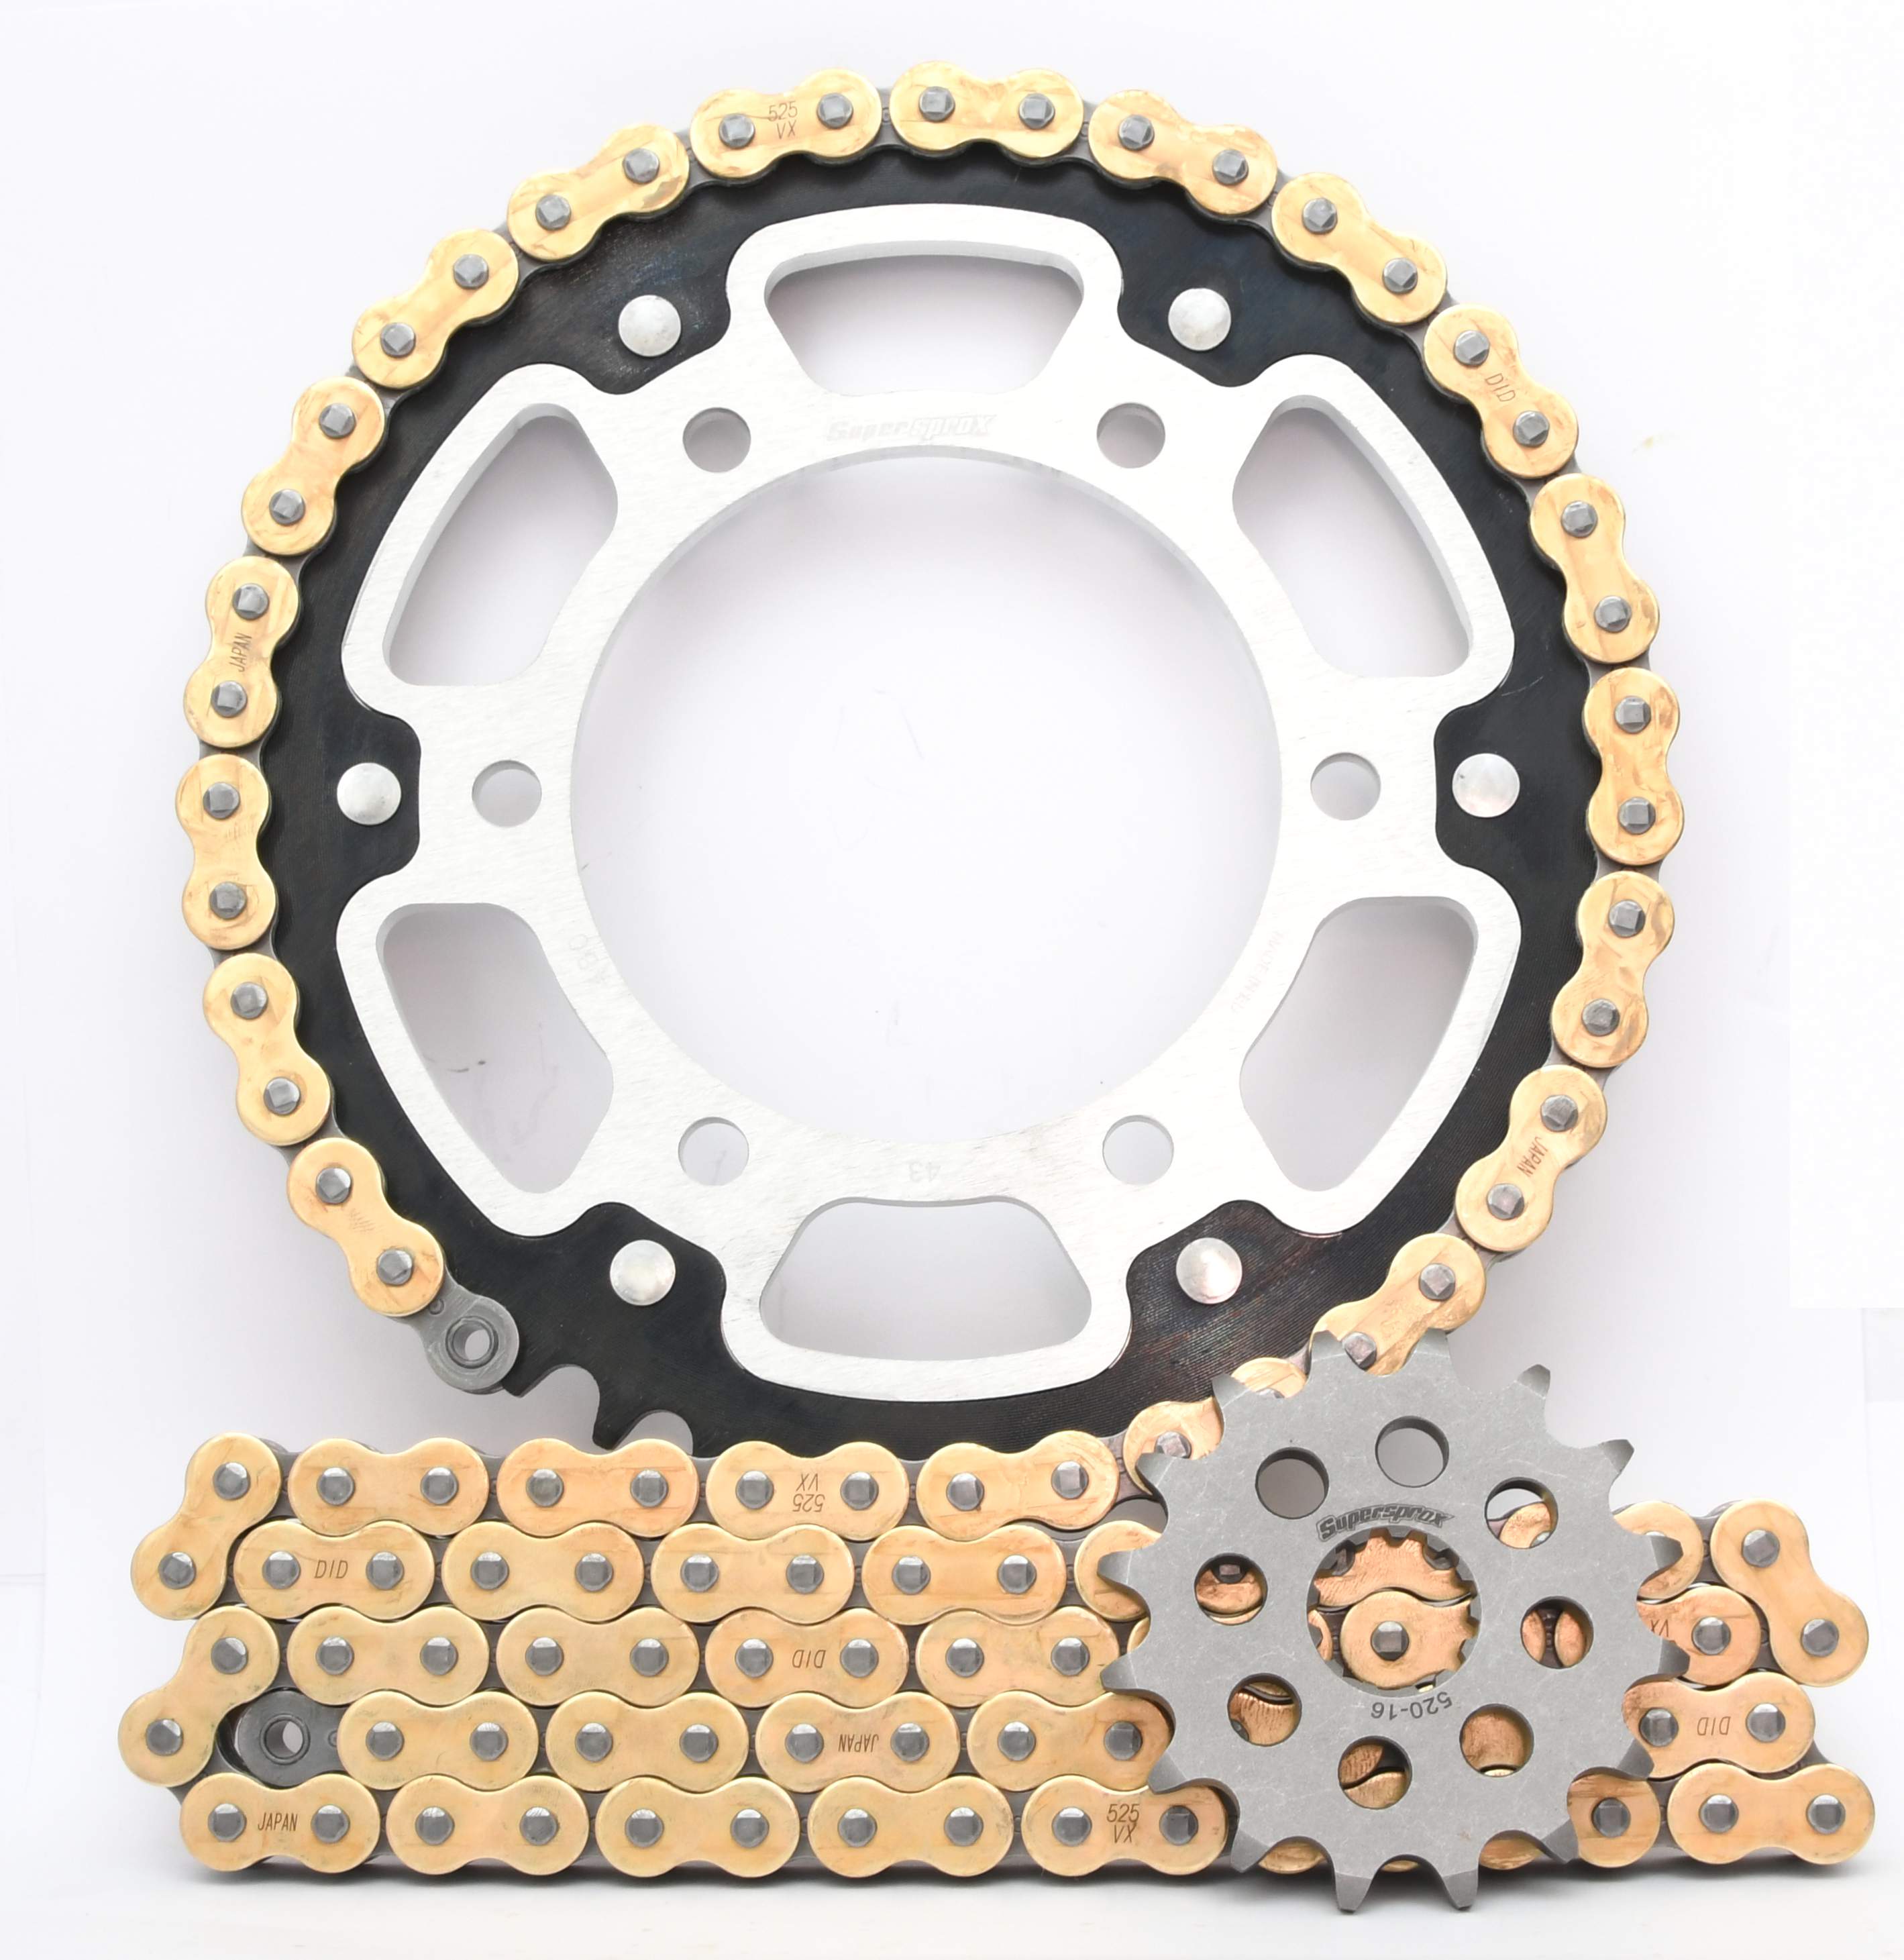 Supersprox Chain & Sprocket Kit for Yamaha MT-10 - Standard Gearing